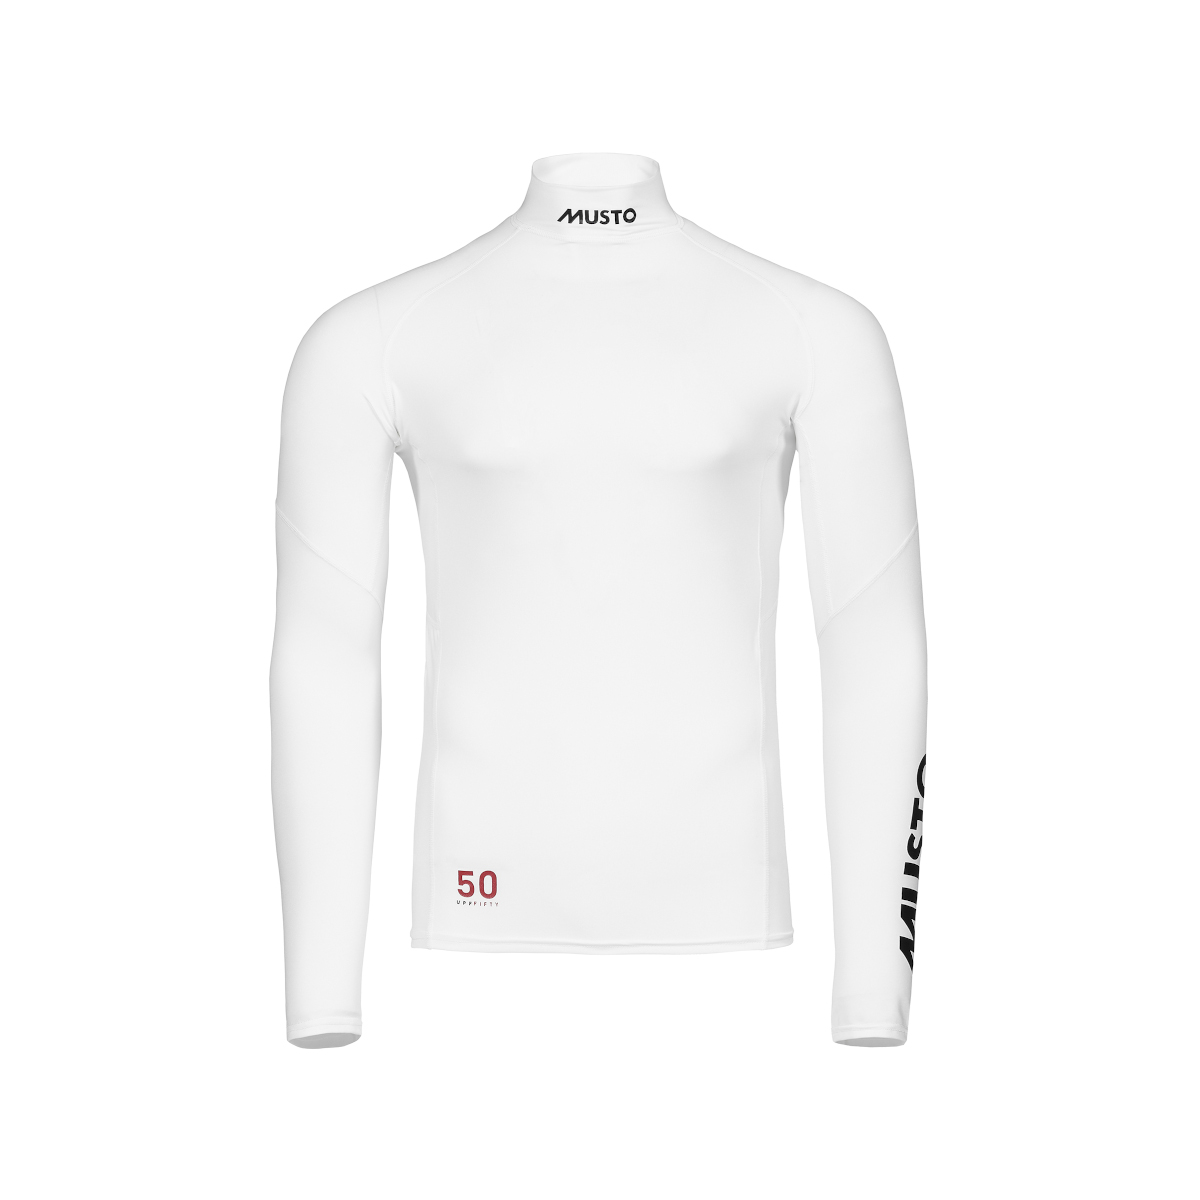 Musto Championship Rash Guard manches longues homme blanc, taille M